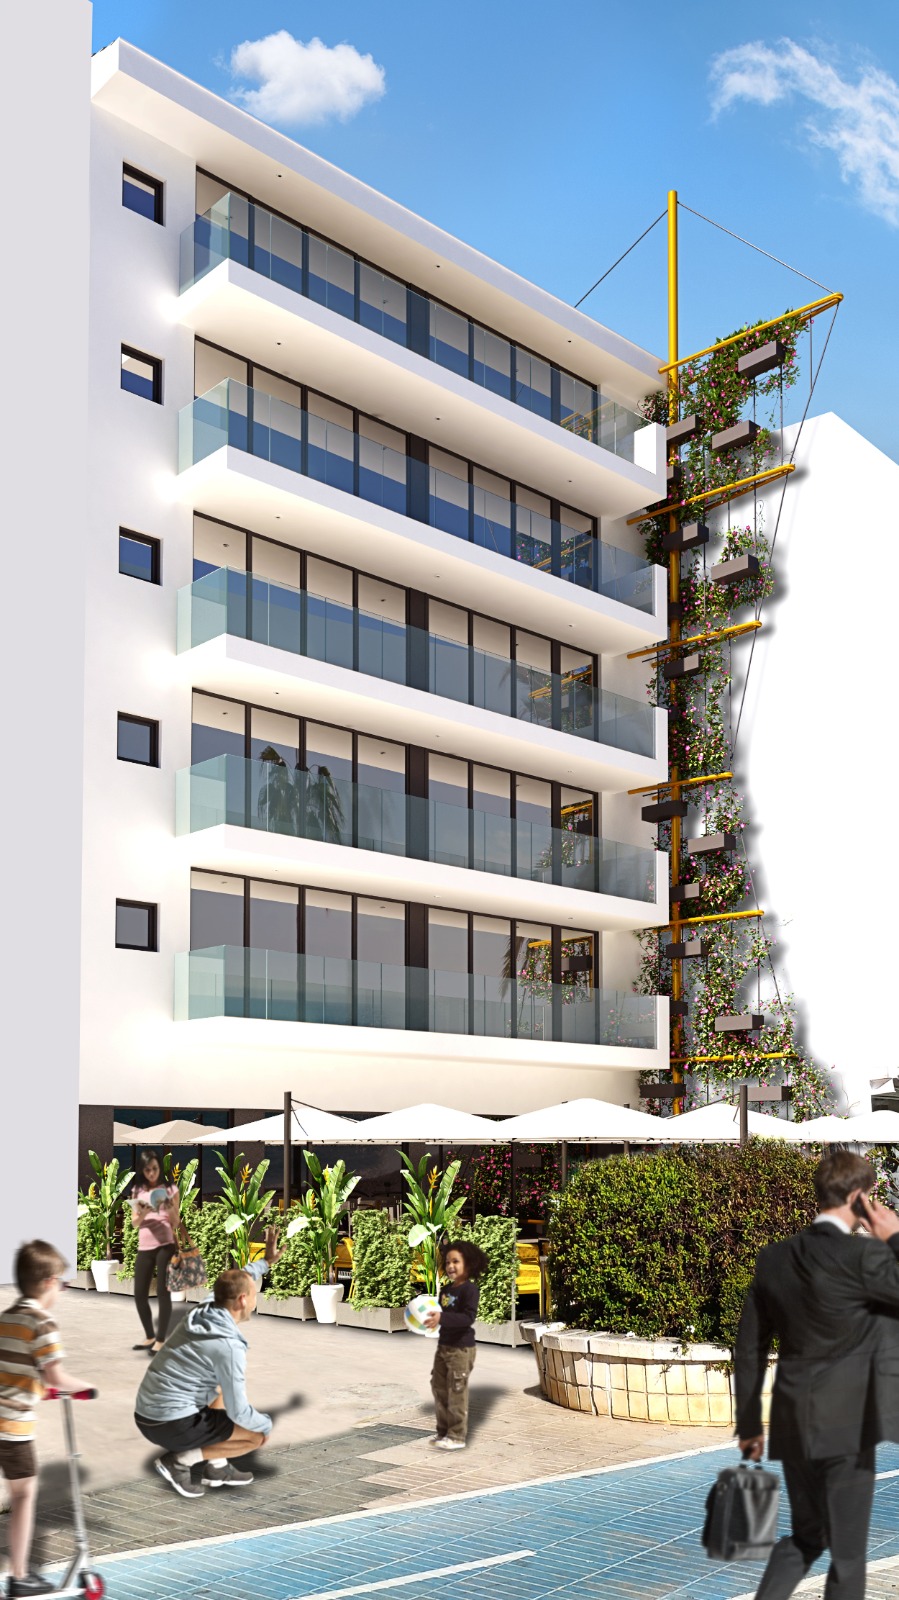 New seafront homes in Altea center